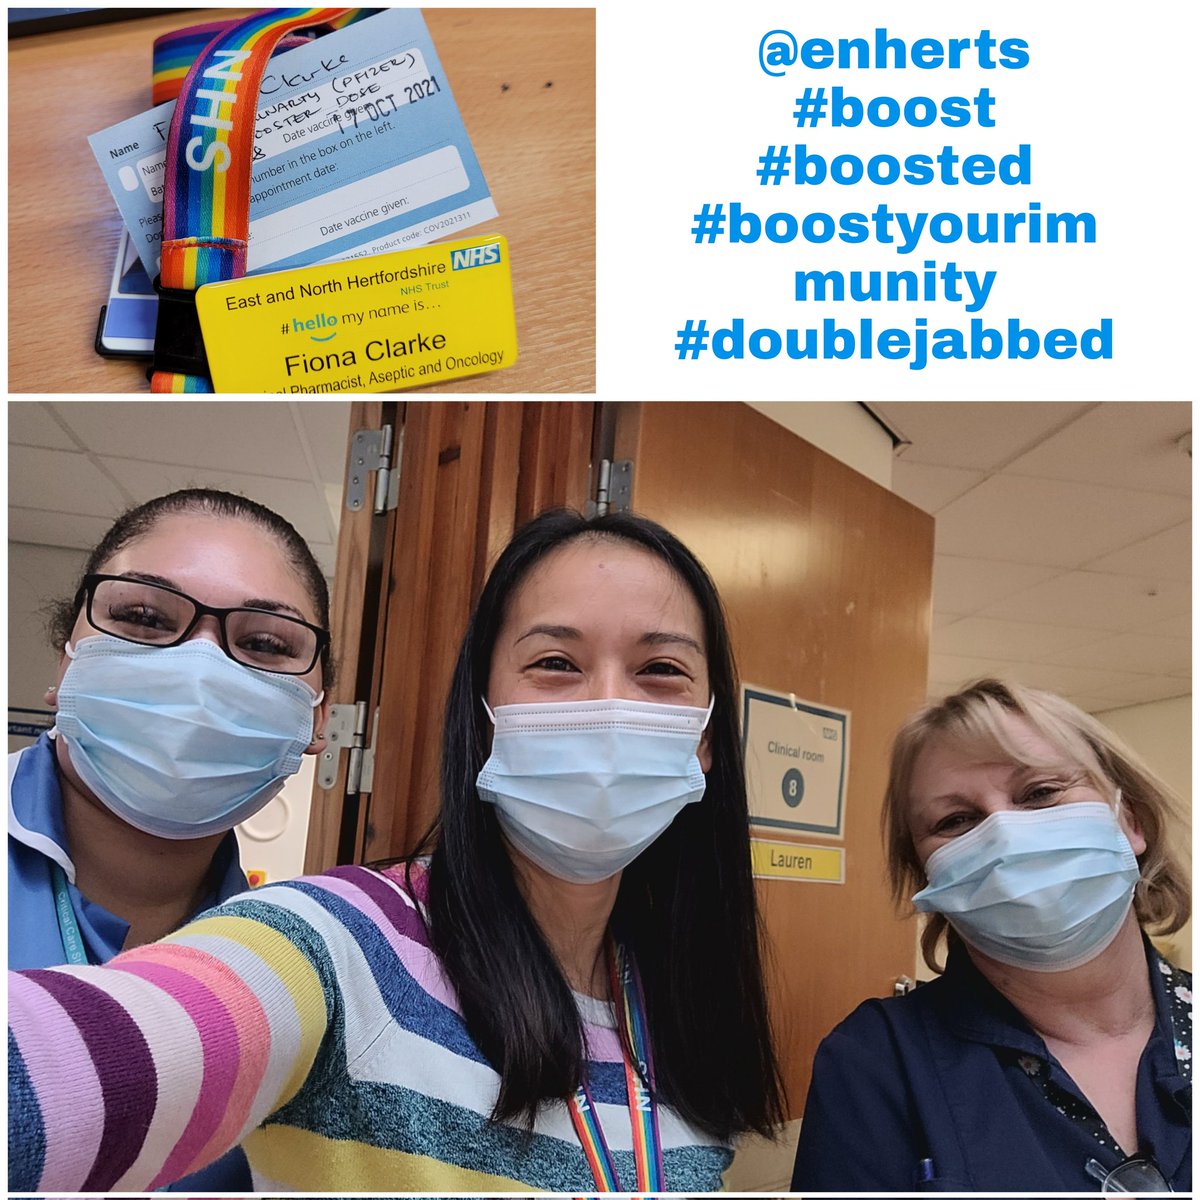 Thanks @enherts vaccine hub Double jabbed today and the service was absolutely seamless, run by wonderful staff.   Even got camera shy Kim and Marie for a cheeky selfie.
I'm now protected and protecting others. #boost #boosted #boostyourimmunity